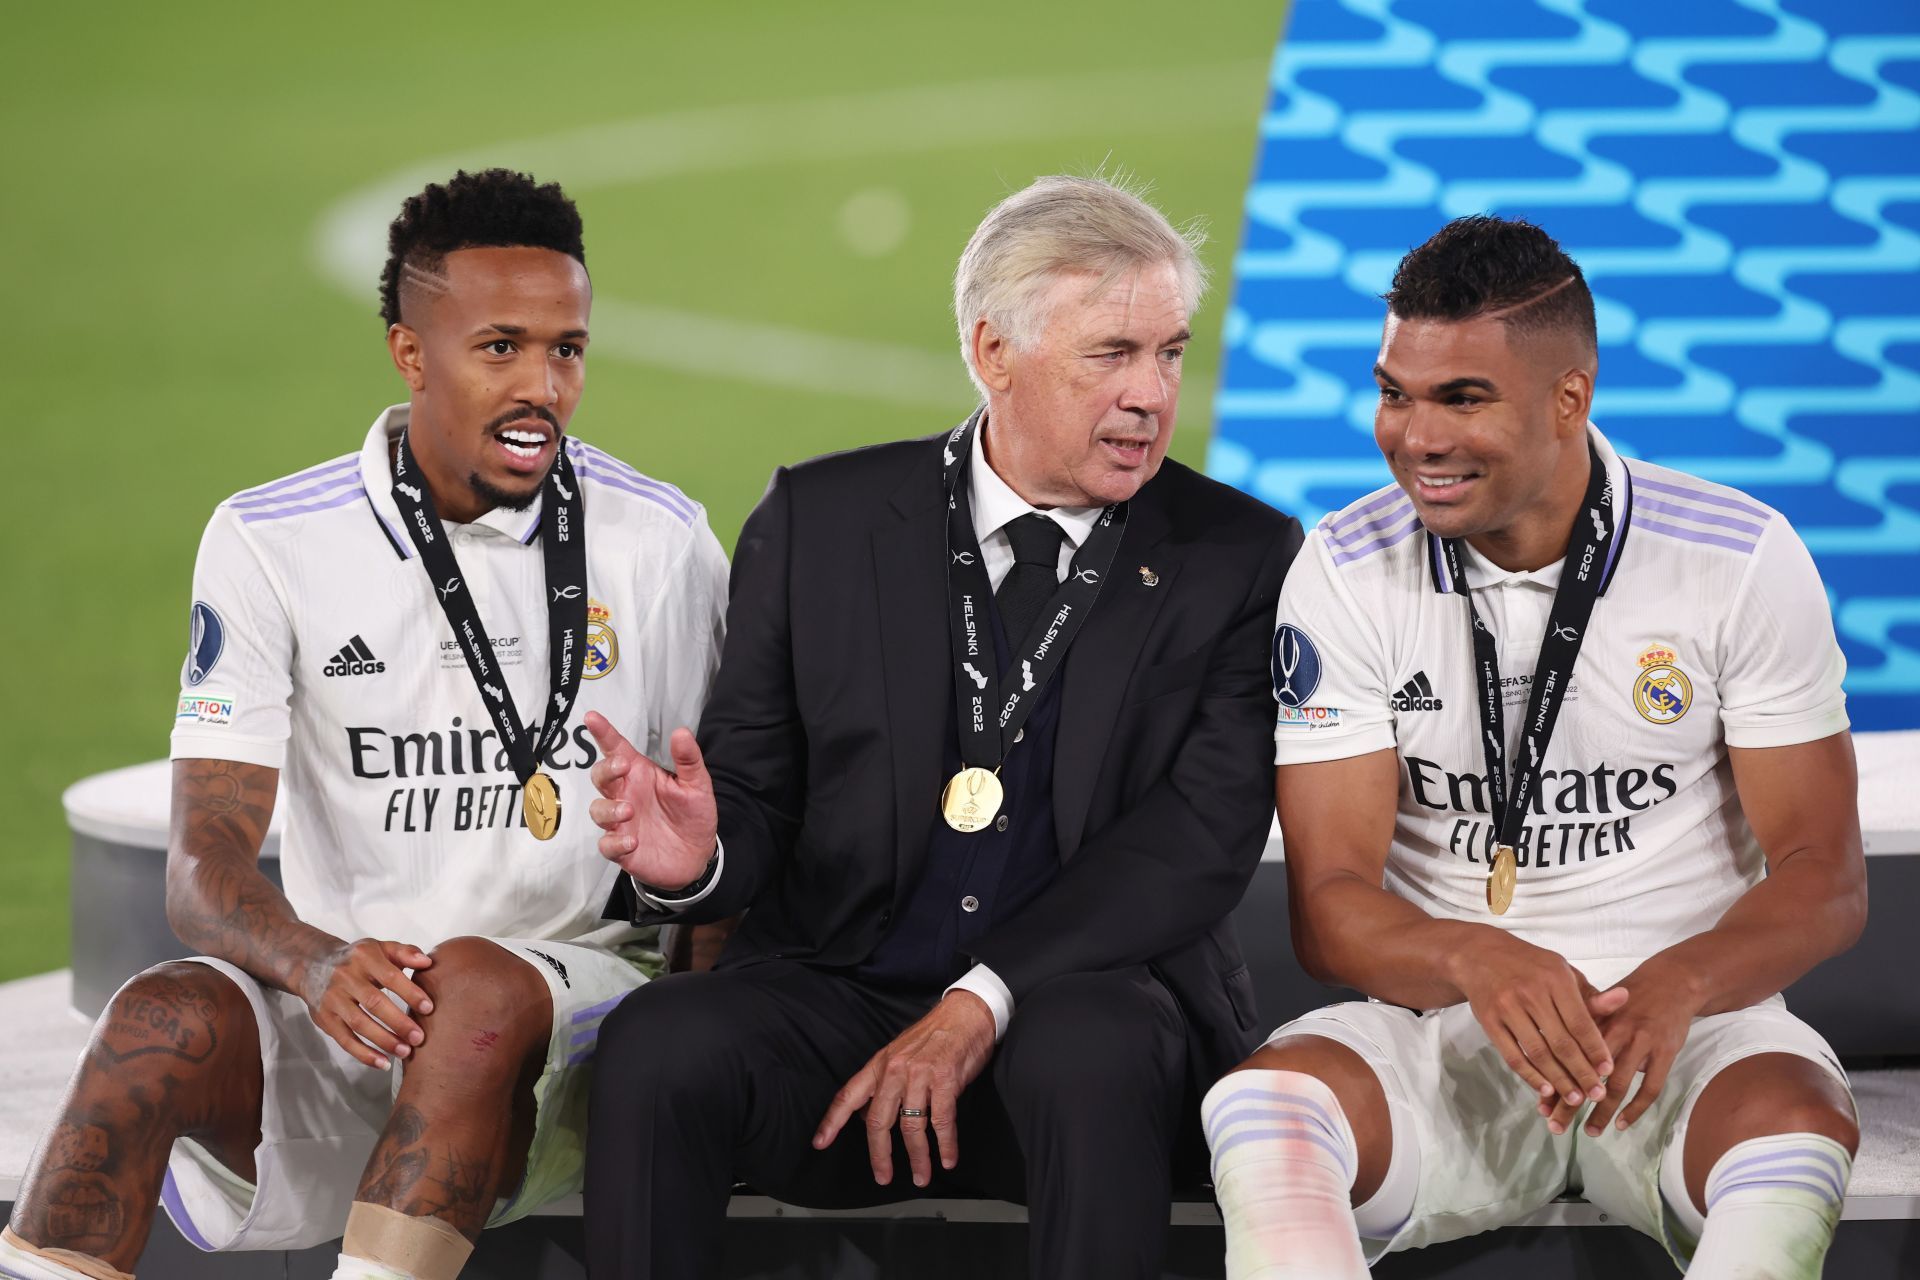 Casemiro (right) flourished under Carlo Ancelotti at Real Madrid before joining Manchester United.